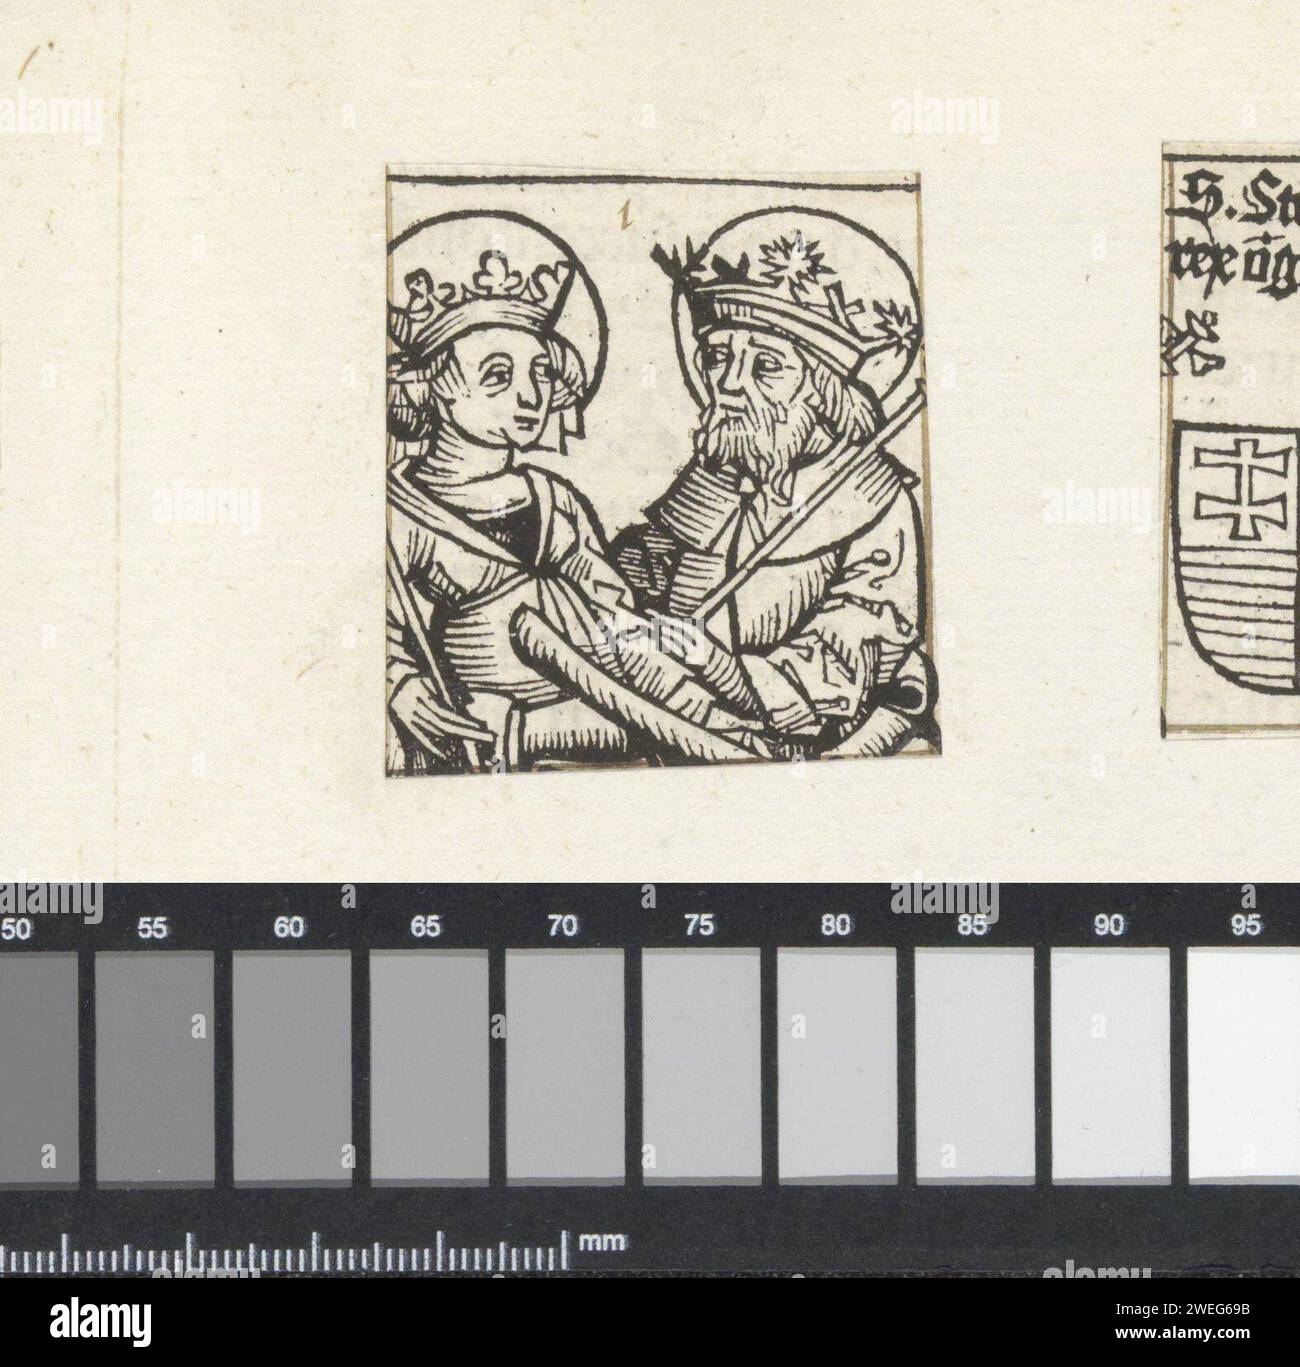 Gisela van Bavaria and Stefanus I van Hungary, Michel Wolgemut (workshop of), 1493 print A king and queen. The performance is part of the family tree of Emperor Henry II The Holy in the Liber Chronicarum. The text identifies the couple as Gisela van Bavaria and Stefanus I of Hungary. The print is part of an album.  paper  king. queen, empress, etc. (wife of a ruler) Stock Photo